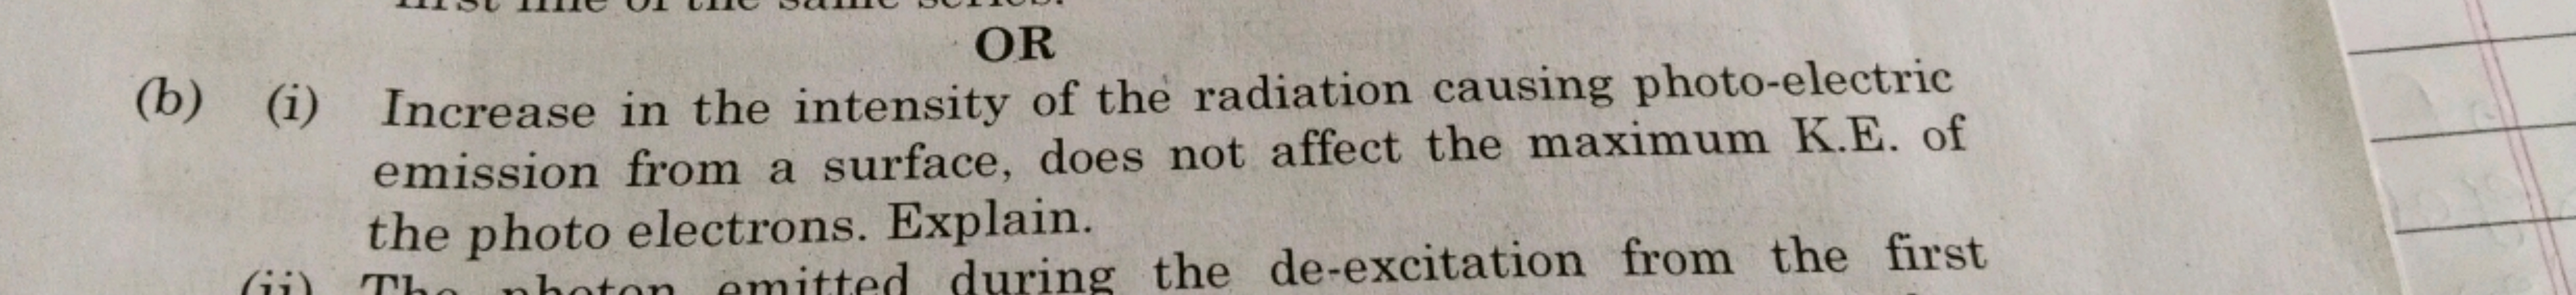 OR
(b) (i) Increase in the intensity of the radiation causing photo-el